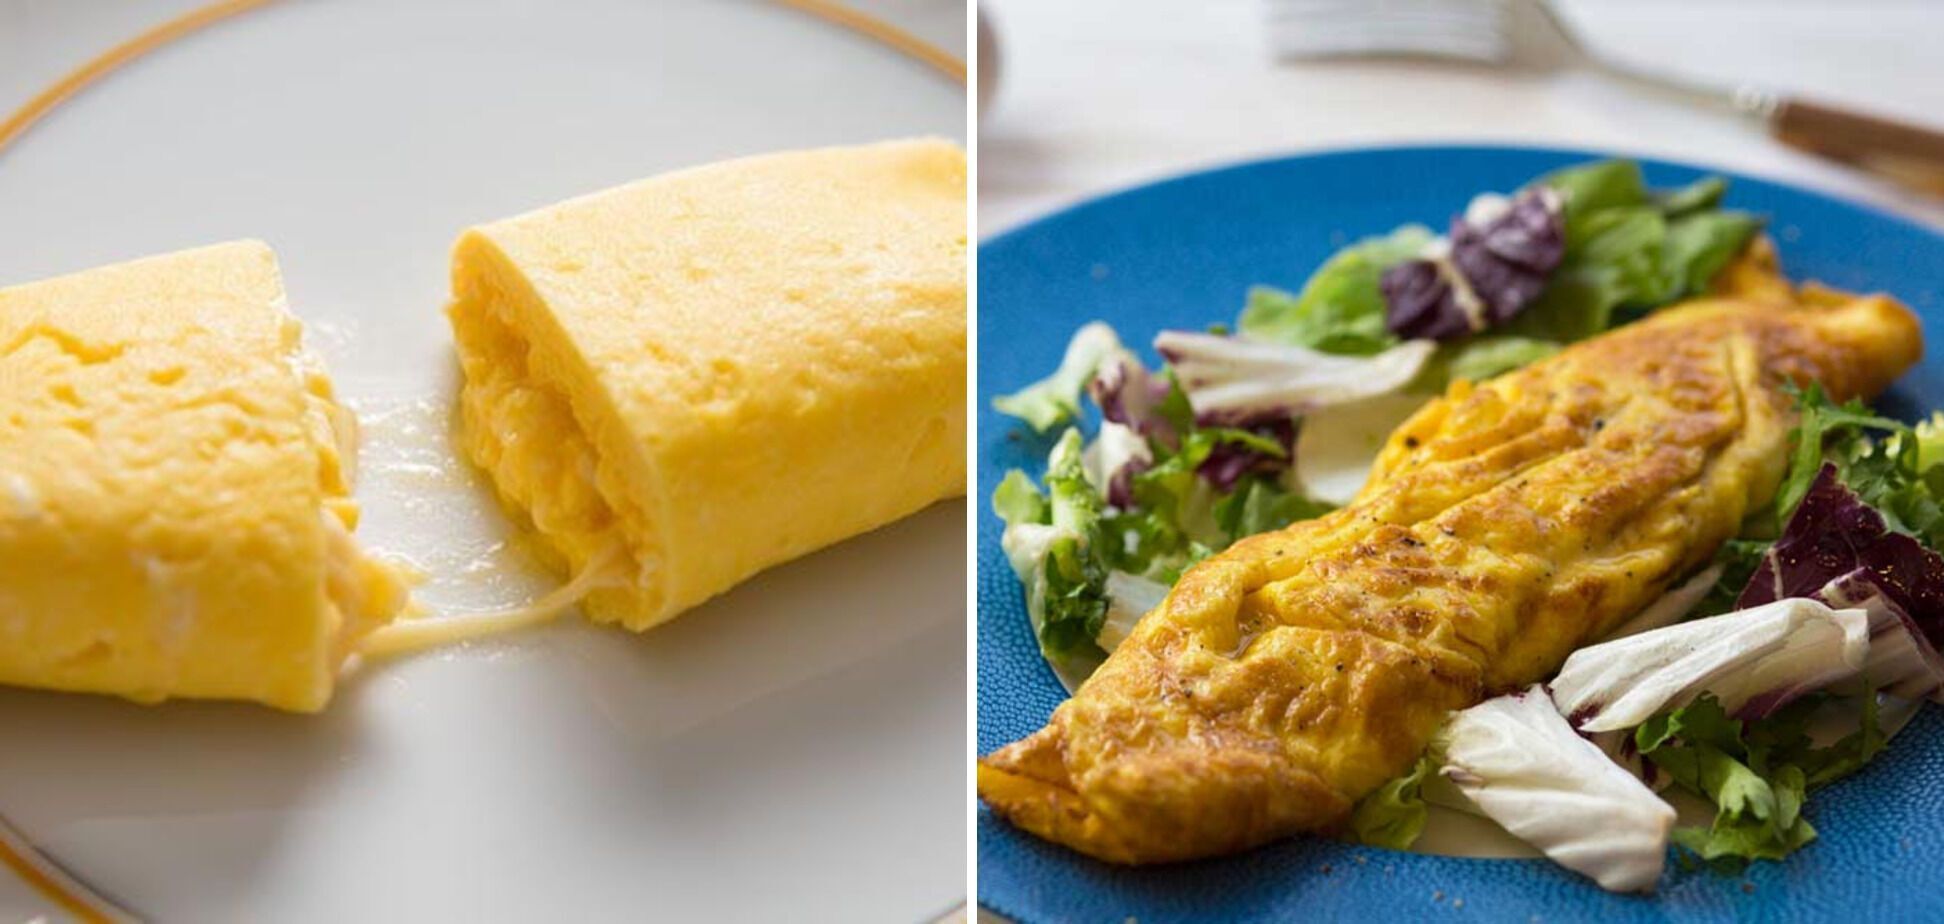 Omelet with cheese